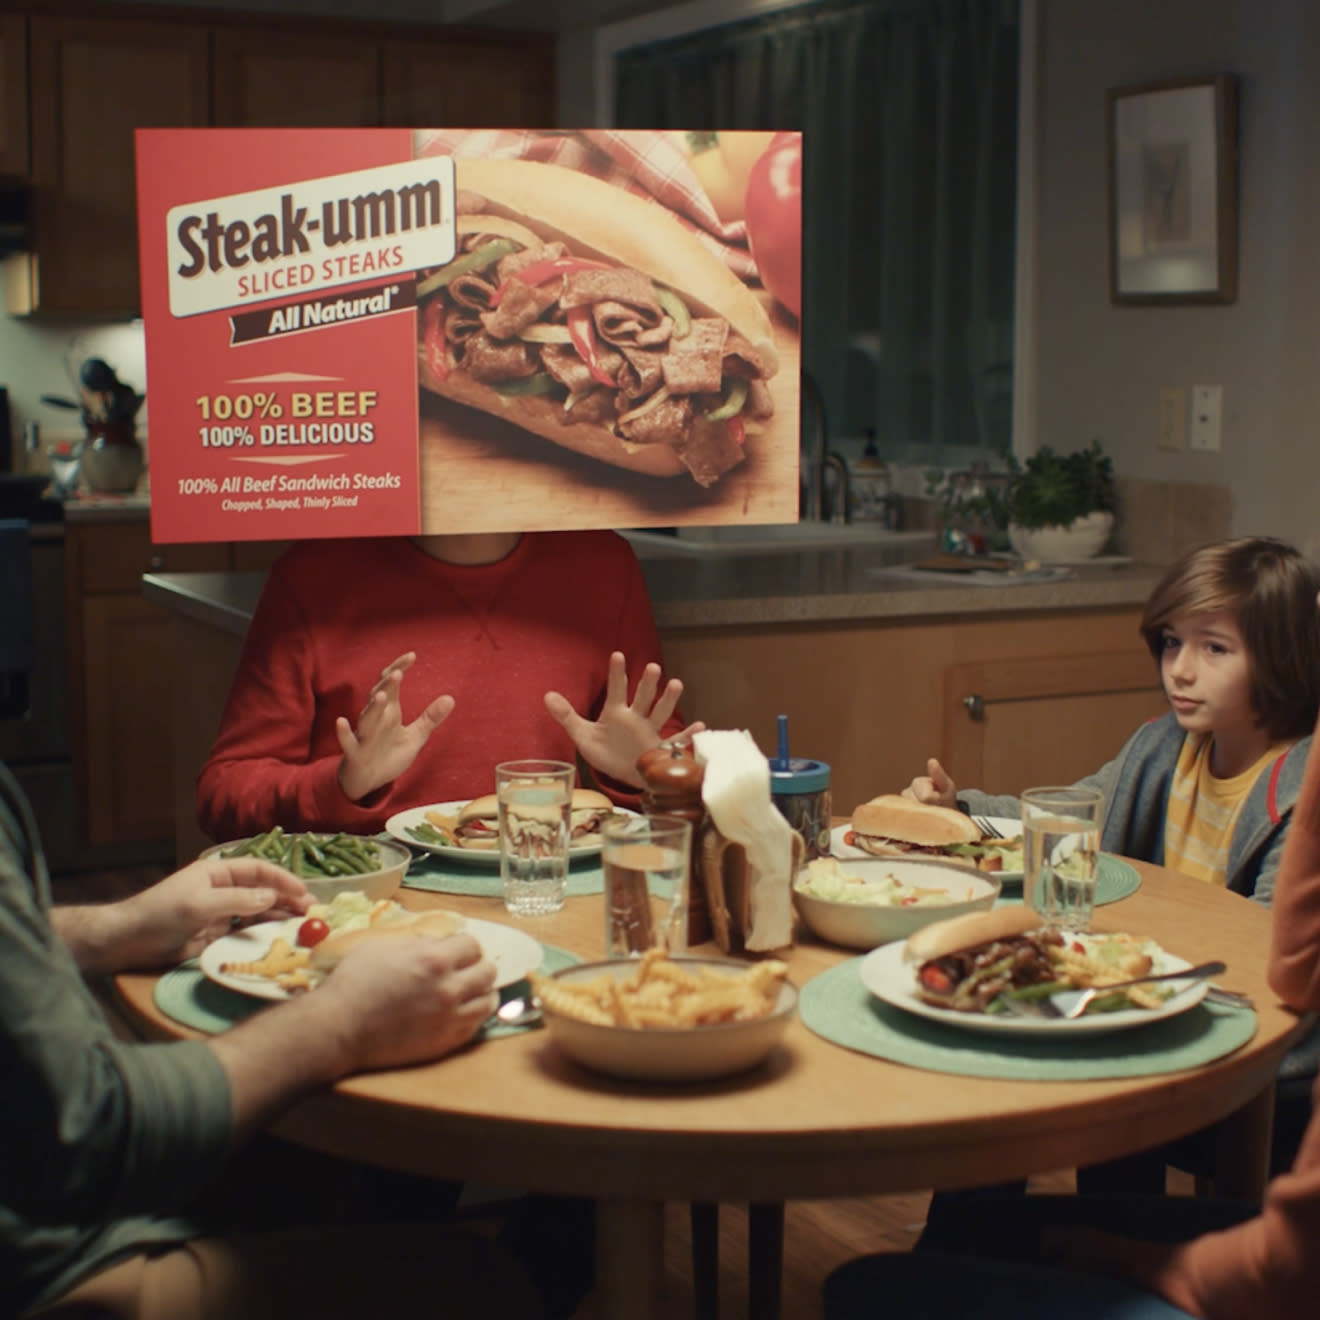 Steak-Umm 'Umm...' campaign promo image of a family eating dinner around the table